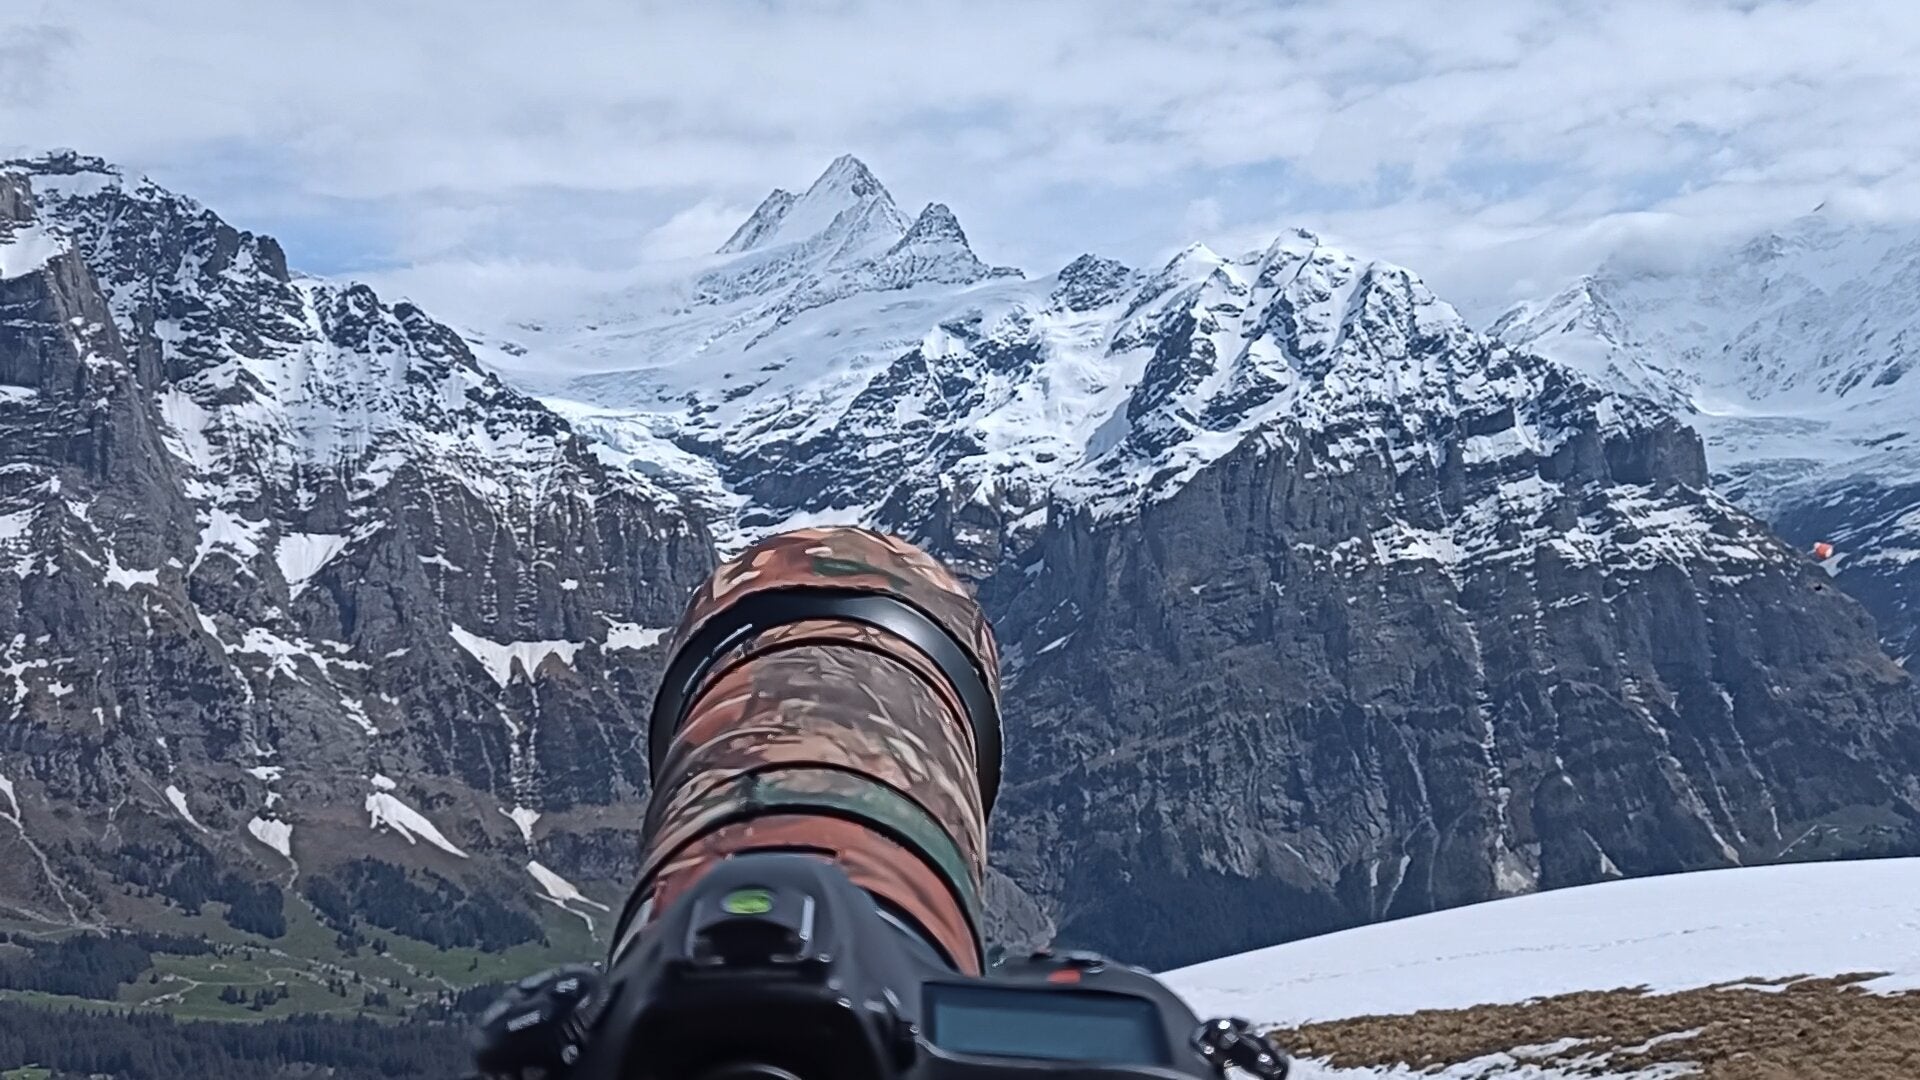 Load video: Swiss mountains from camera view. Camera lens where the magic happens.